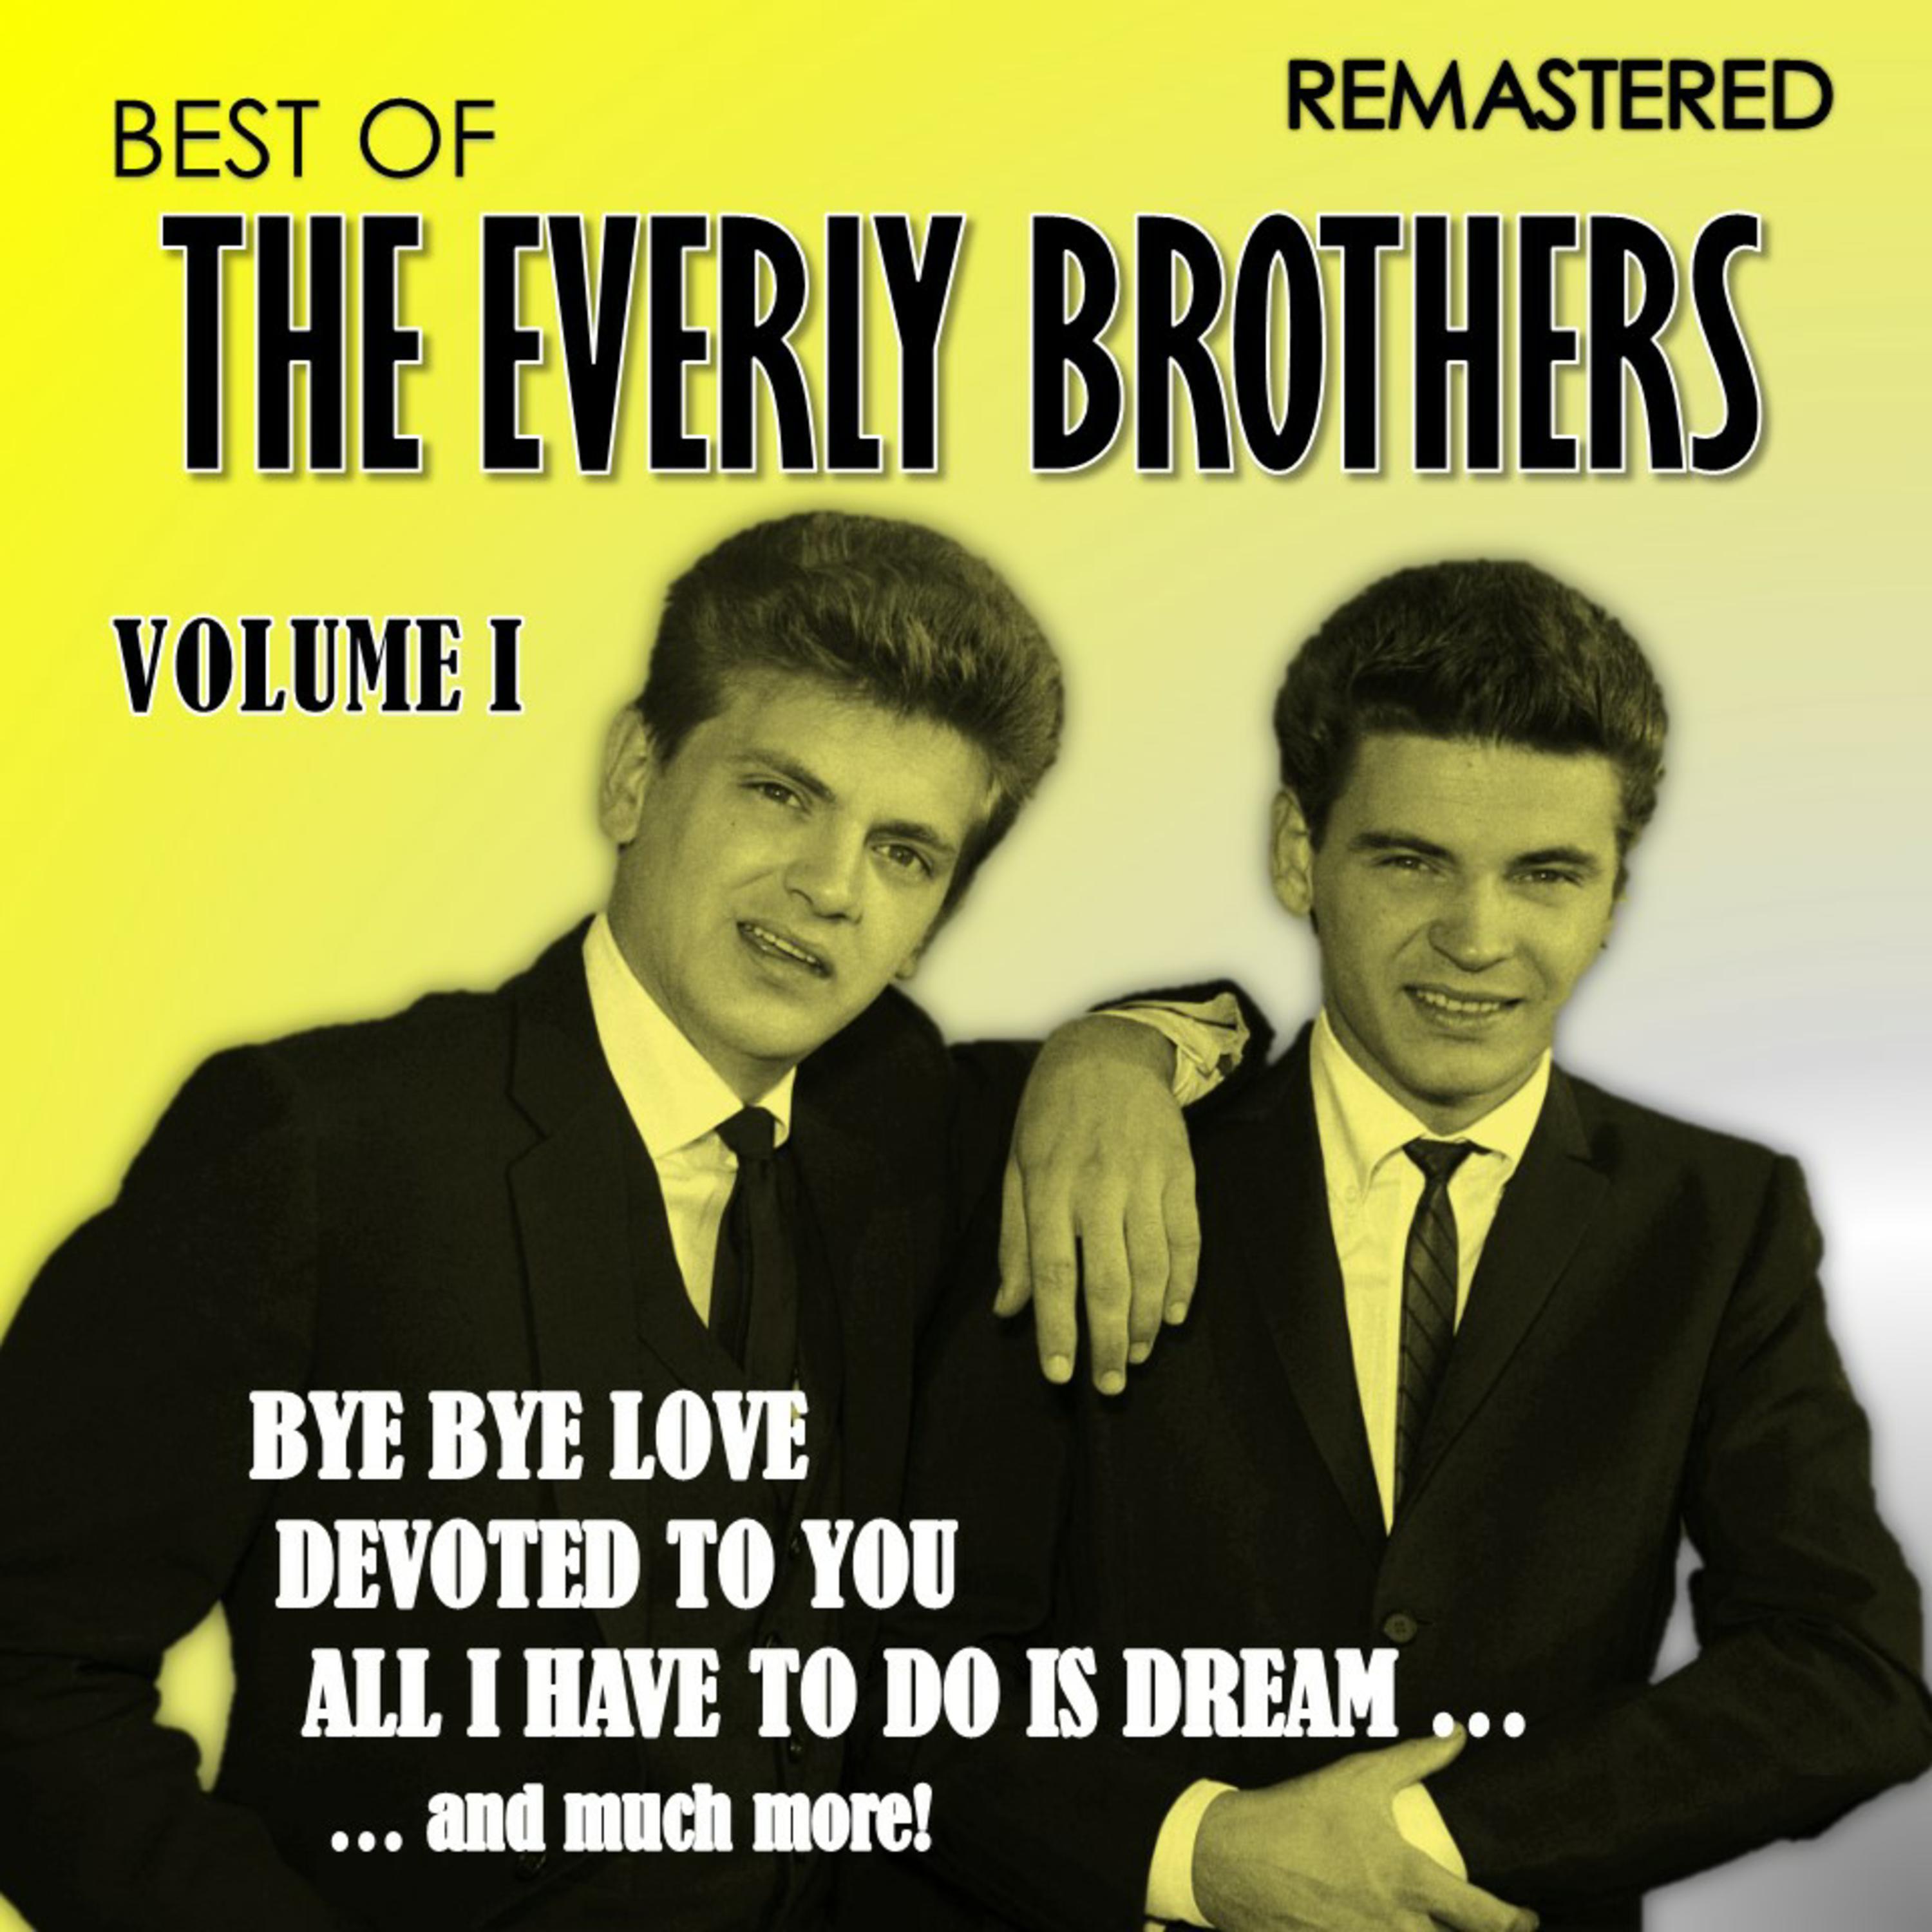 Best of the Everly Brothers - Vol. 1 (Remastered)